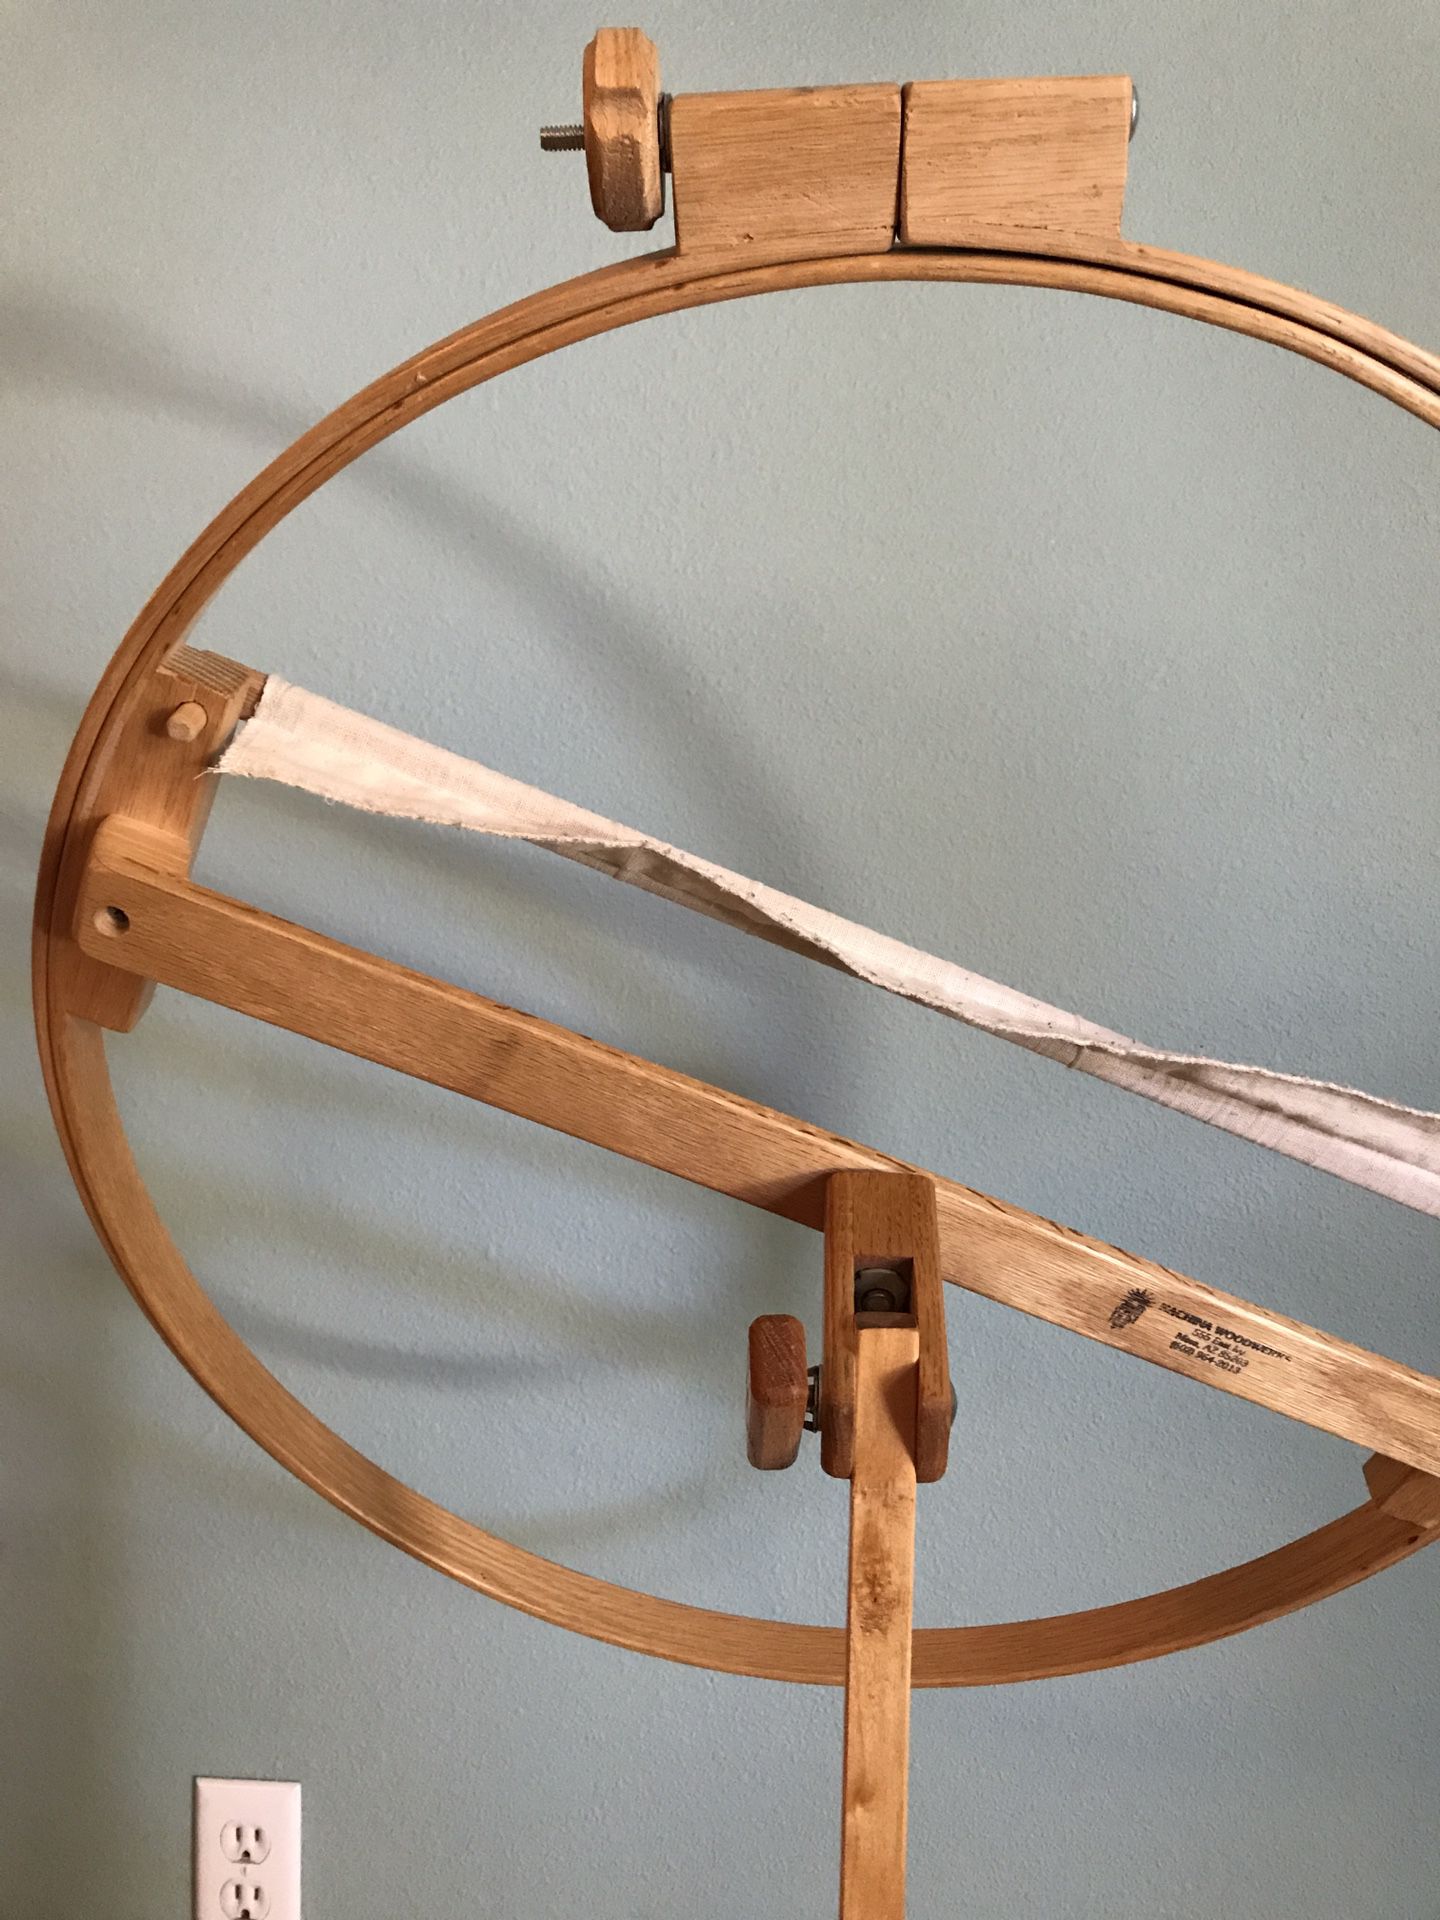 Hinterberg 22” Solid Oak Quilting Hoop With Stand for Sale in Bellevue, WA  - OfferUp